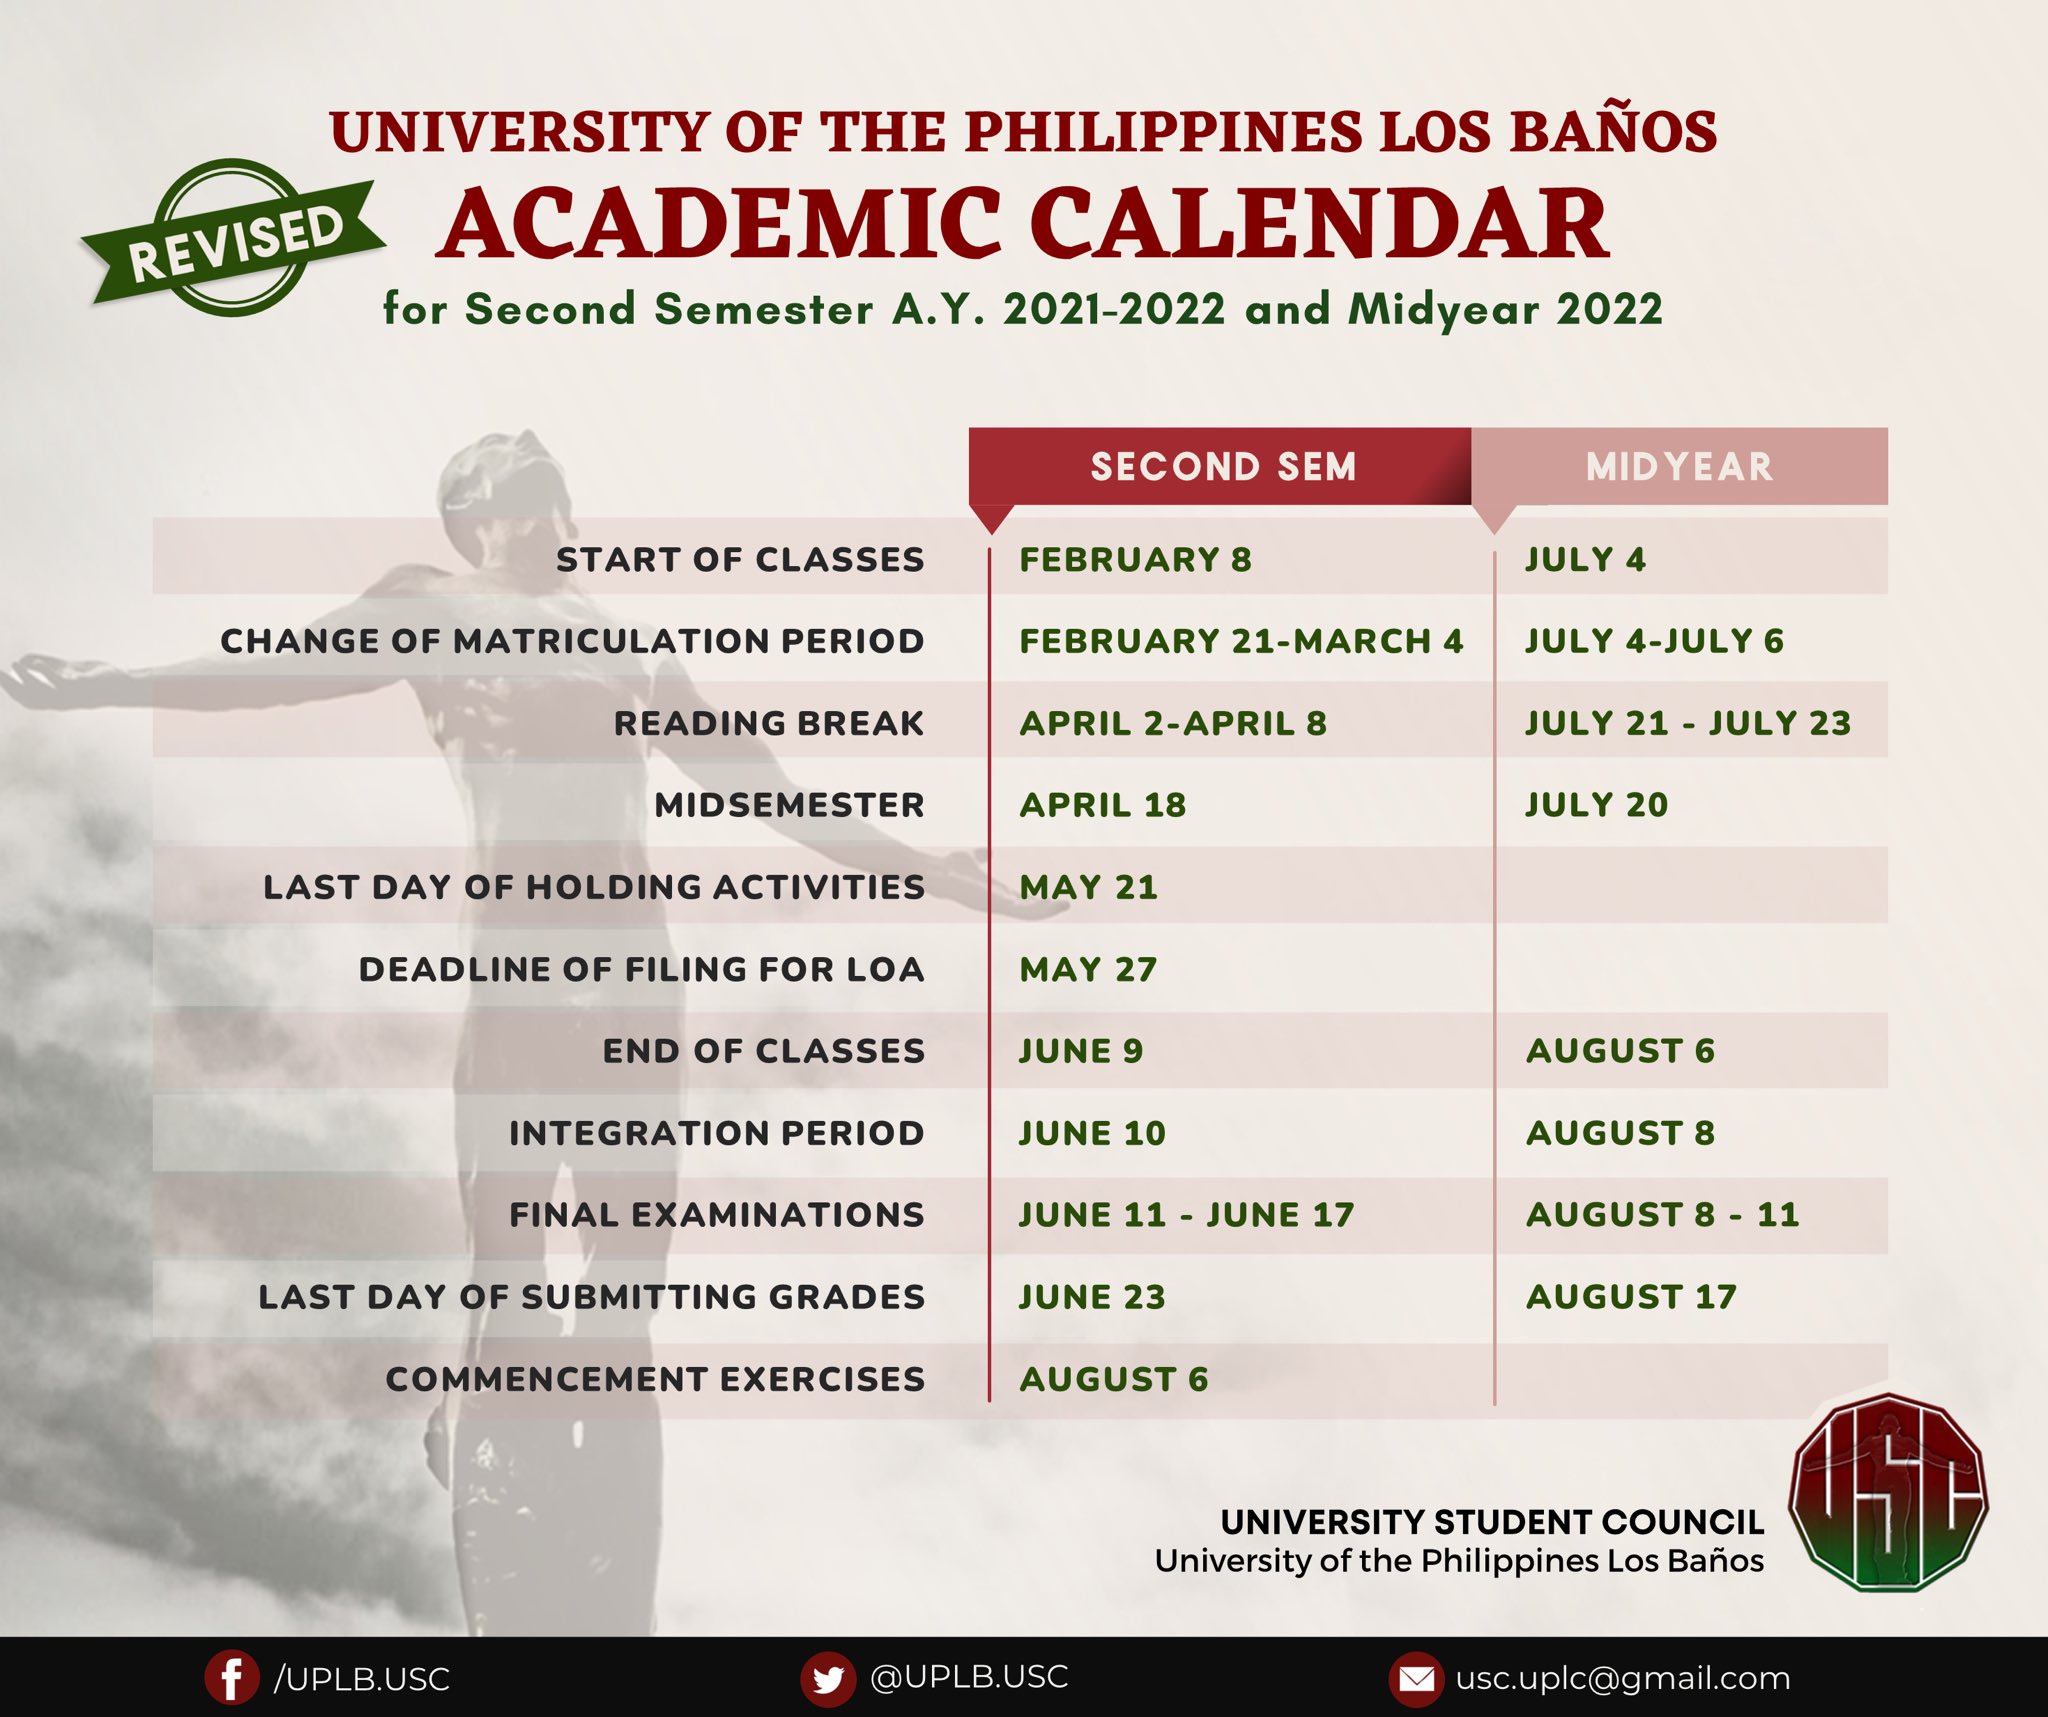 twitter-up-los-ba-os-usc-heads-up-uplb-academic-calendar-here-are-the-dates-to-remember